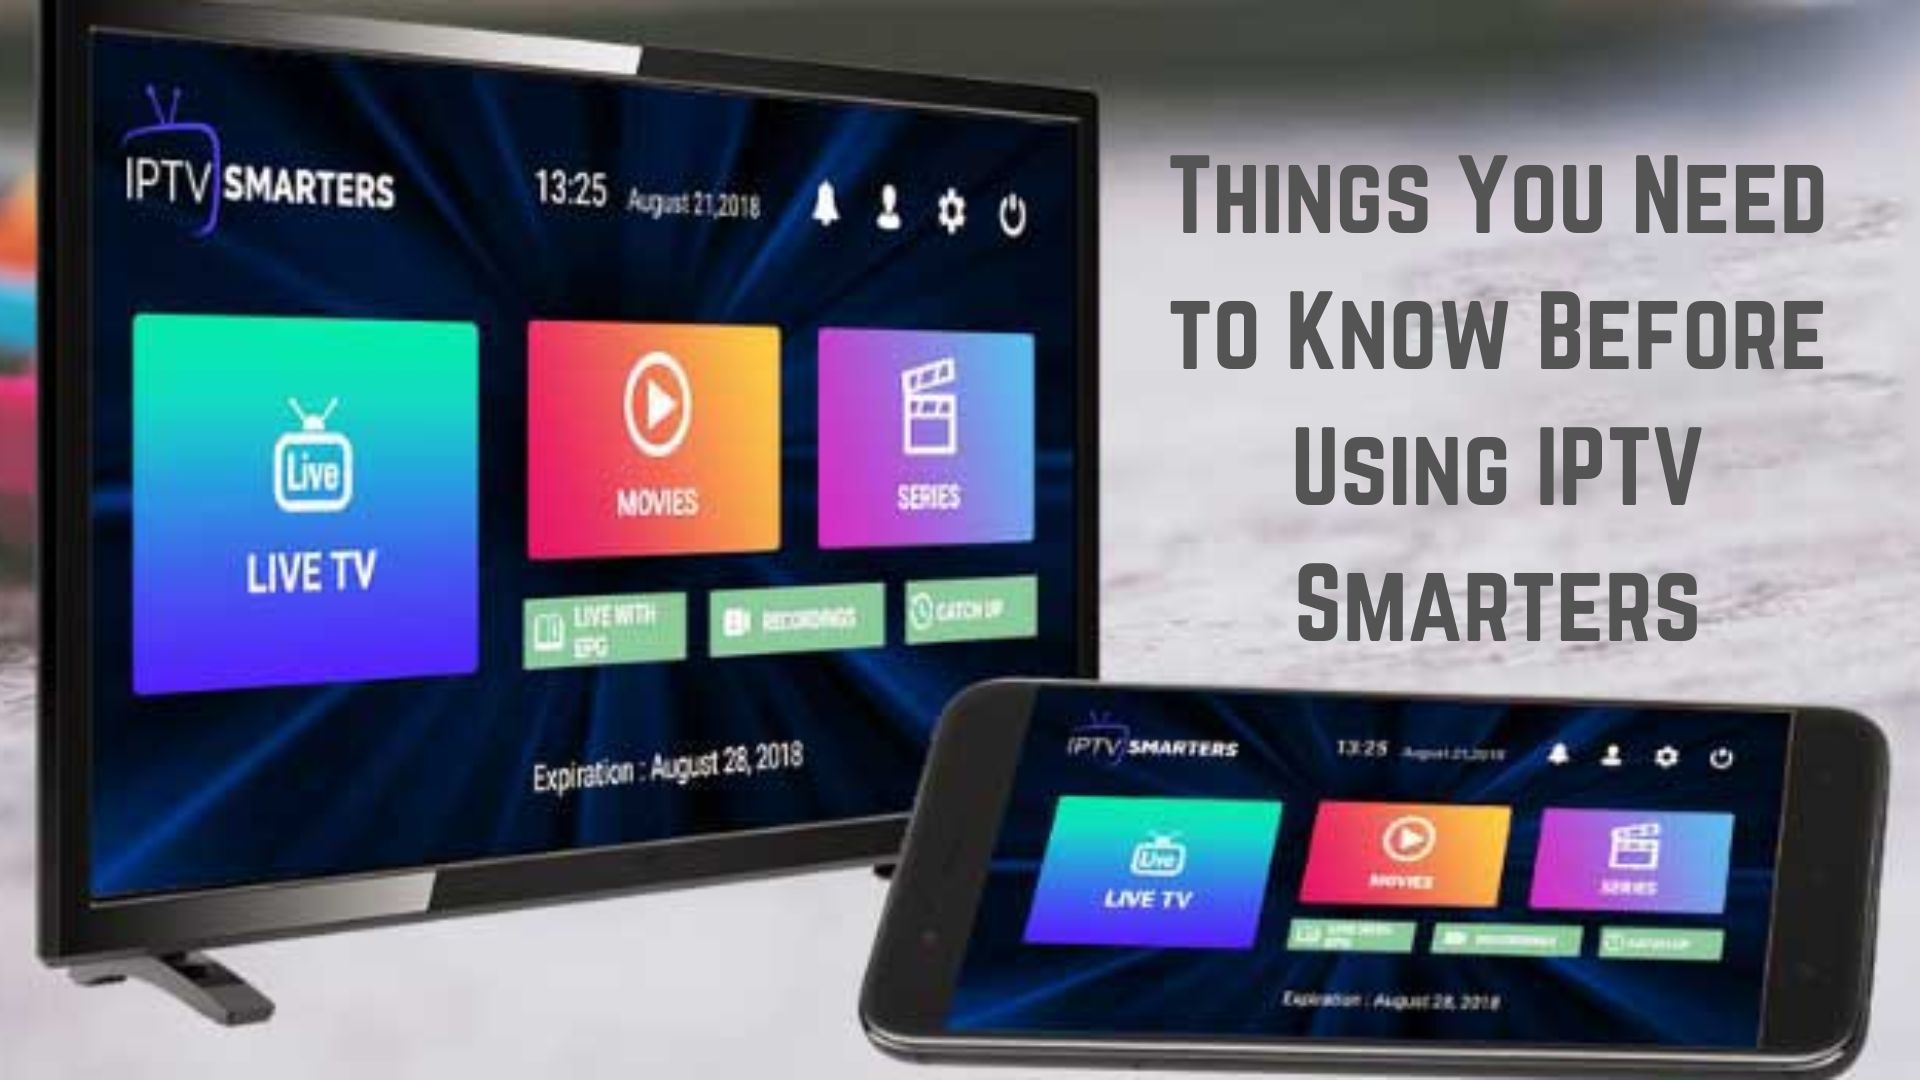 Things You Need to Know Before Using IPTV Smarters-dd8f2687